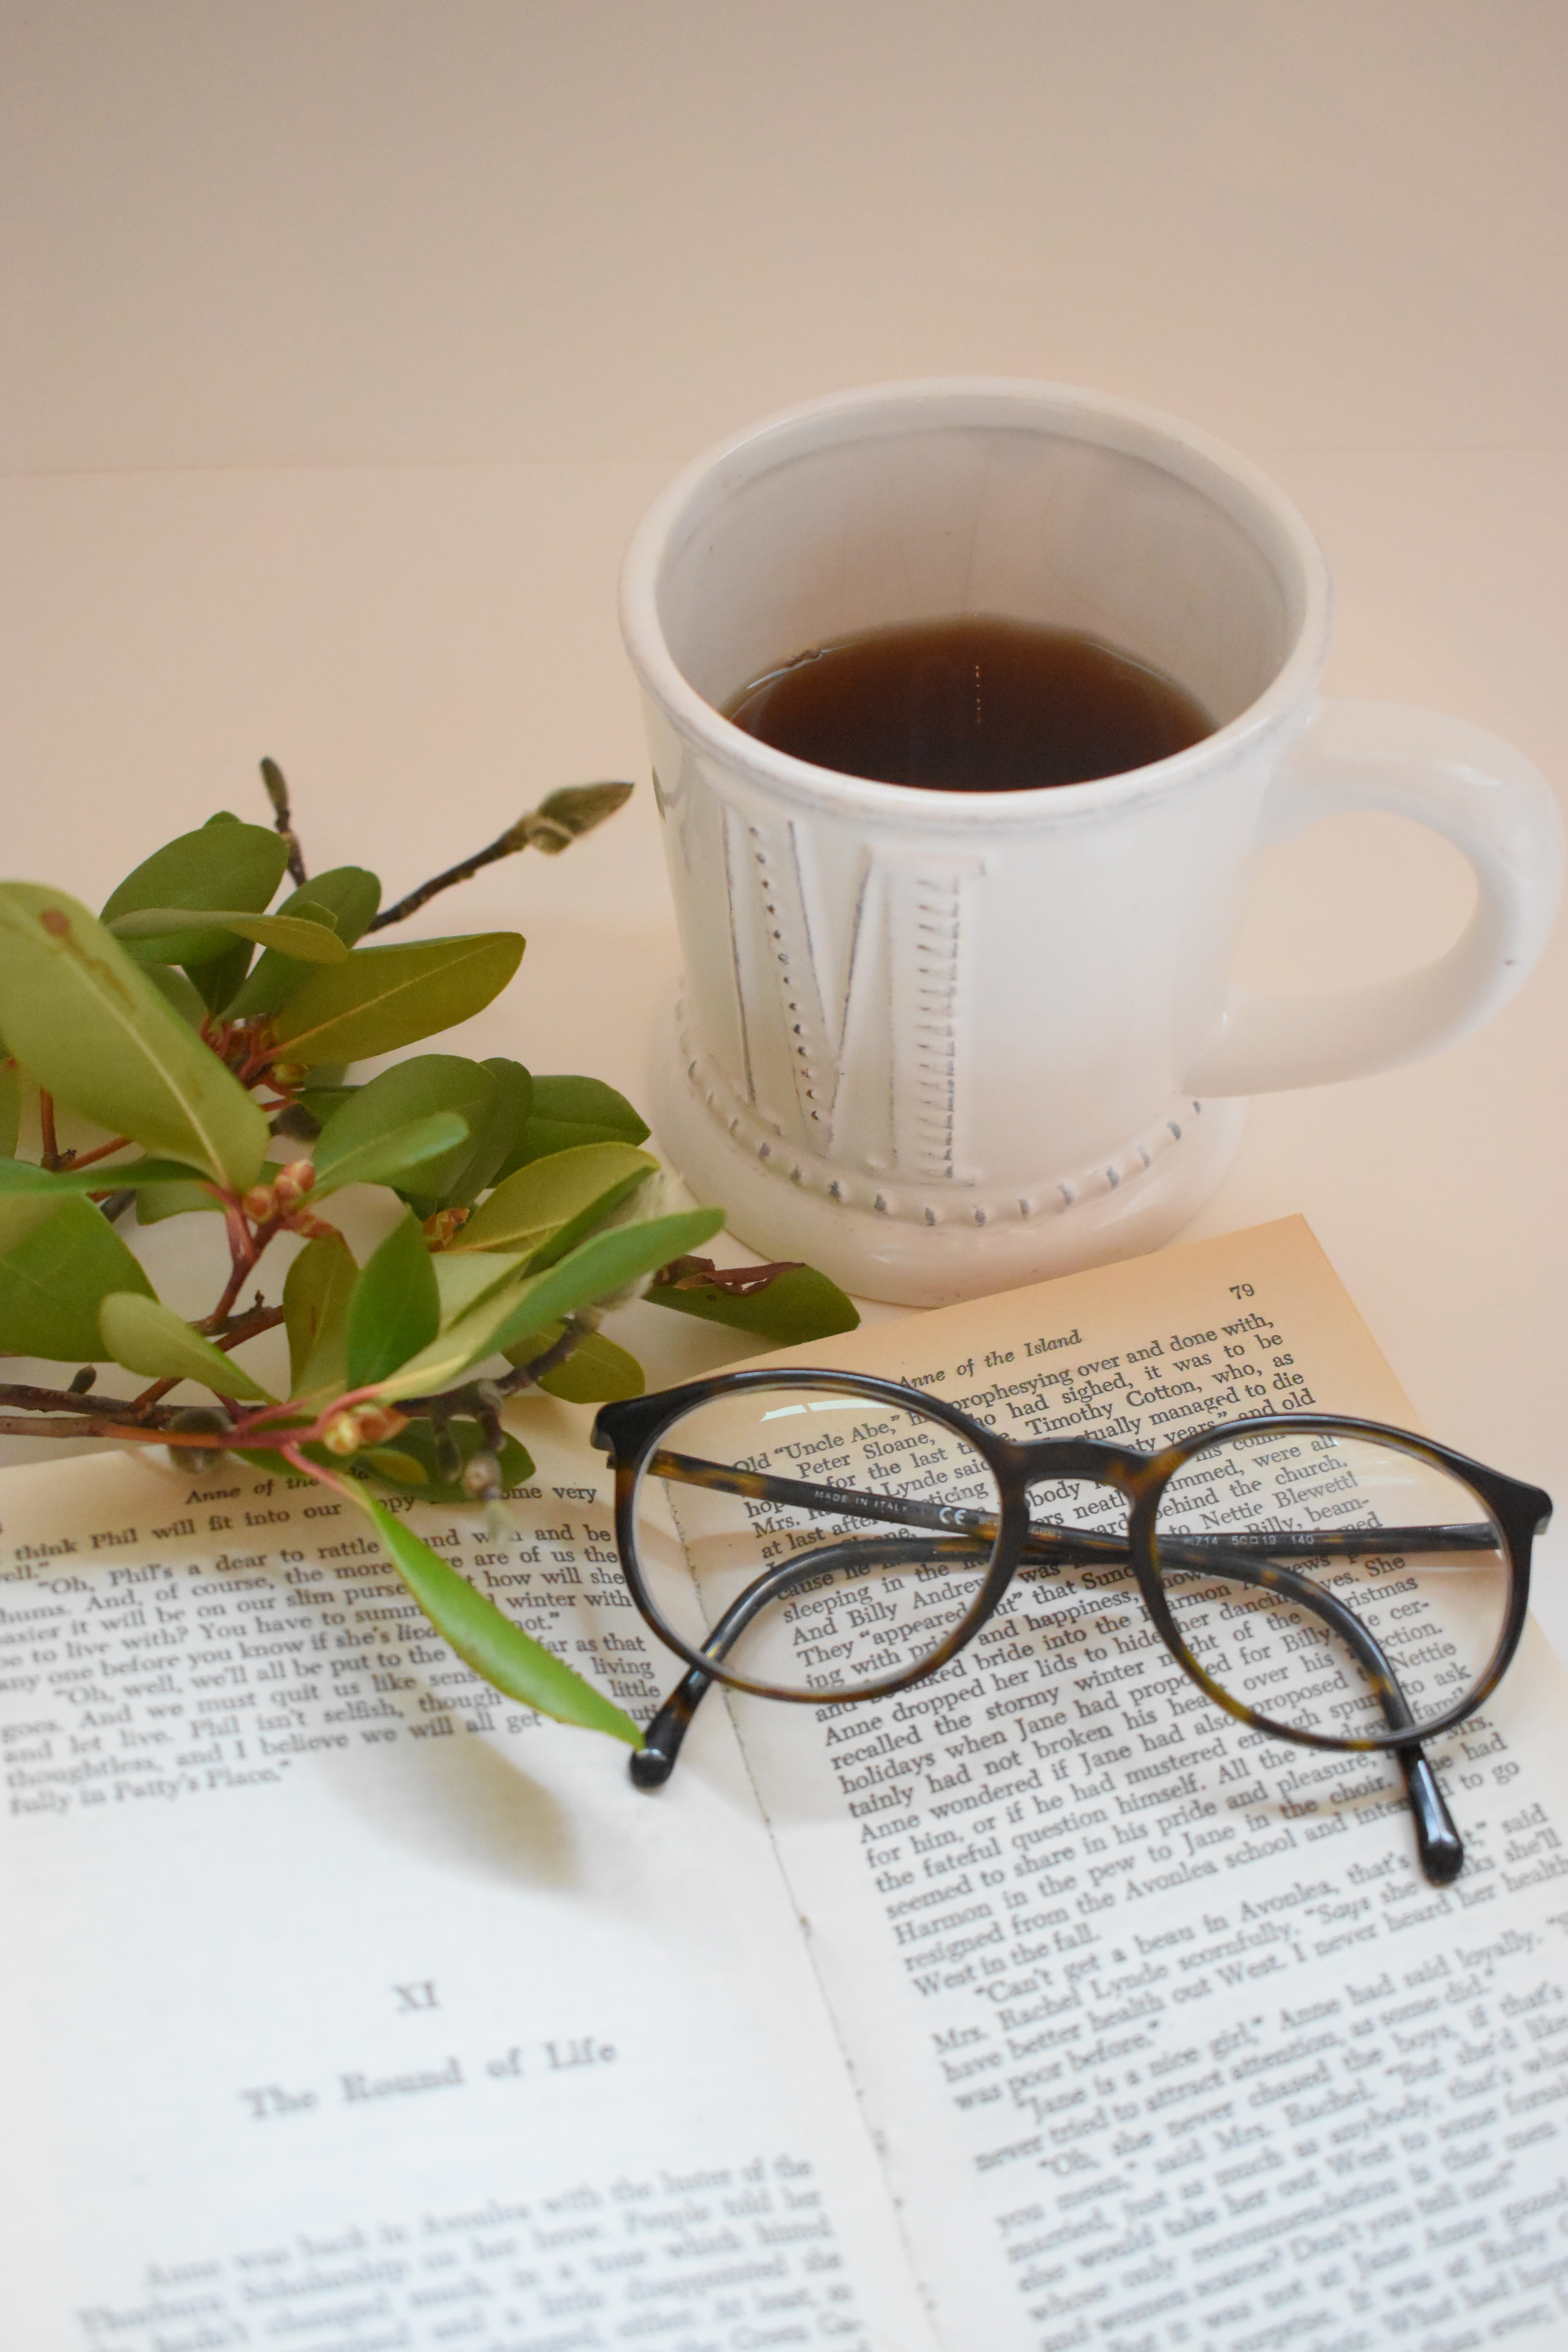 spectacles, miscellanea, miscellaneous, cup, book, glasses cellphone